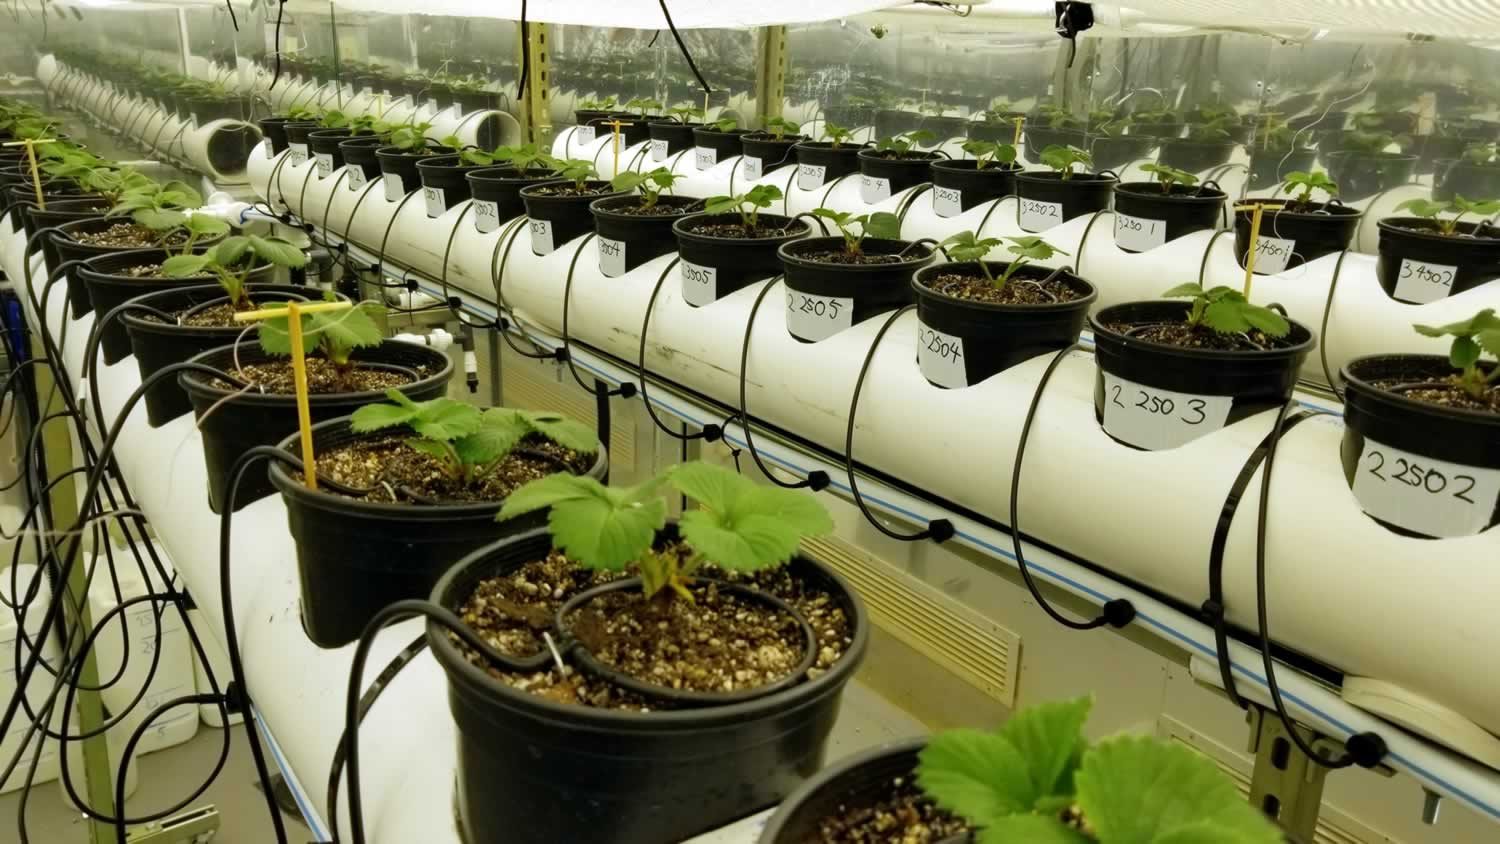 strawberry nursery production in controlled environments